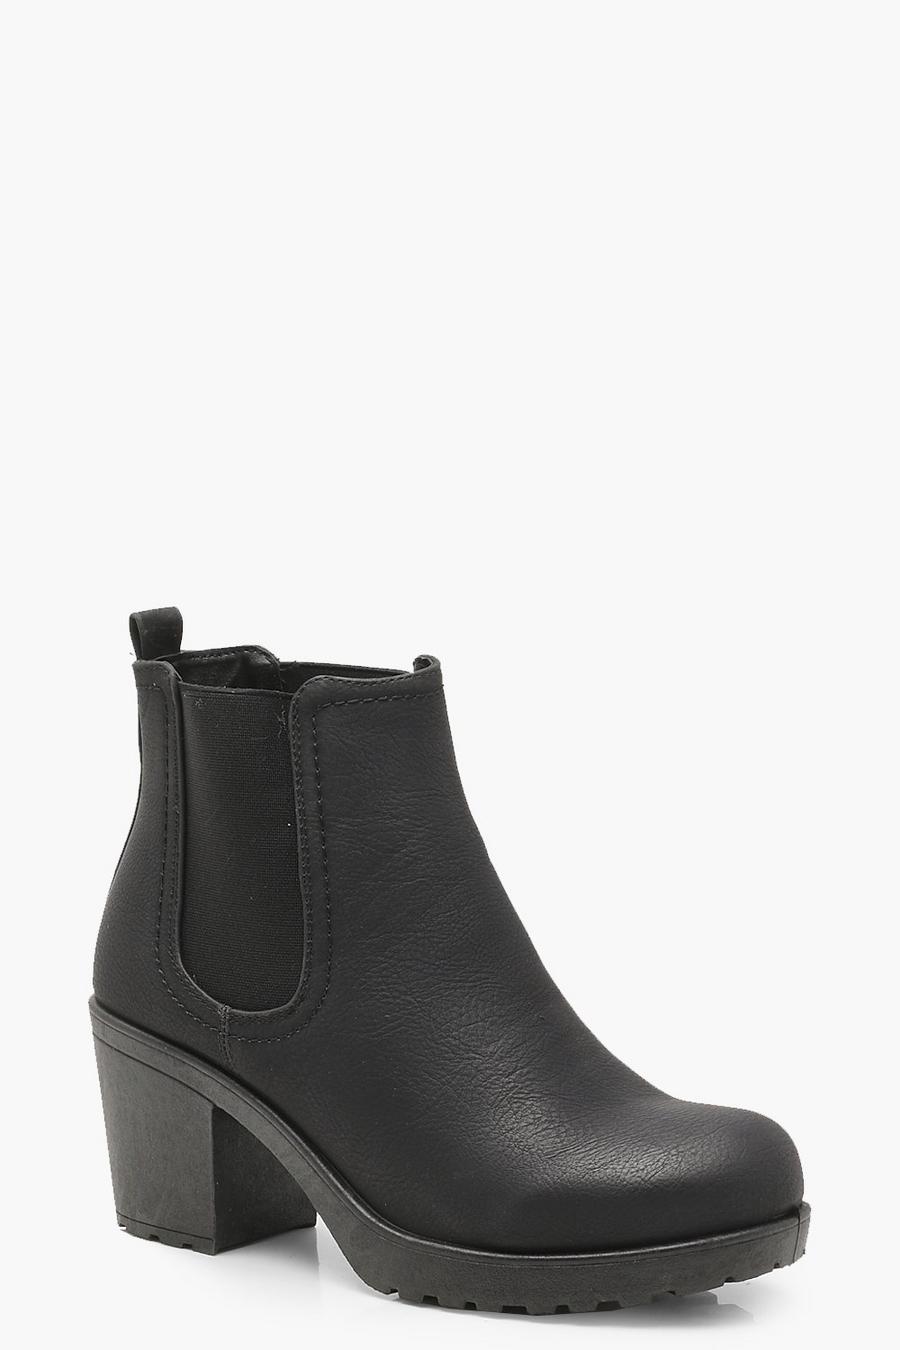 Black Wide Width Chunky Cleated Heel Chelsea Boots